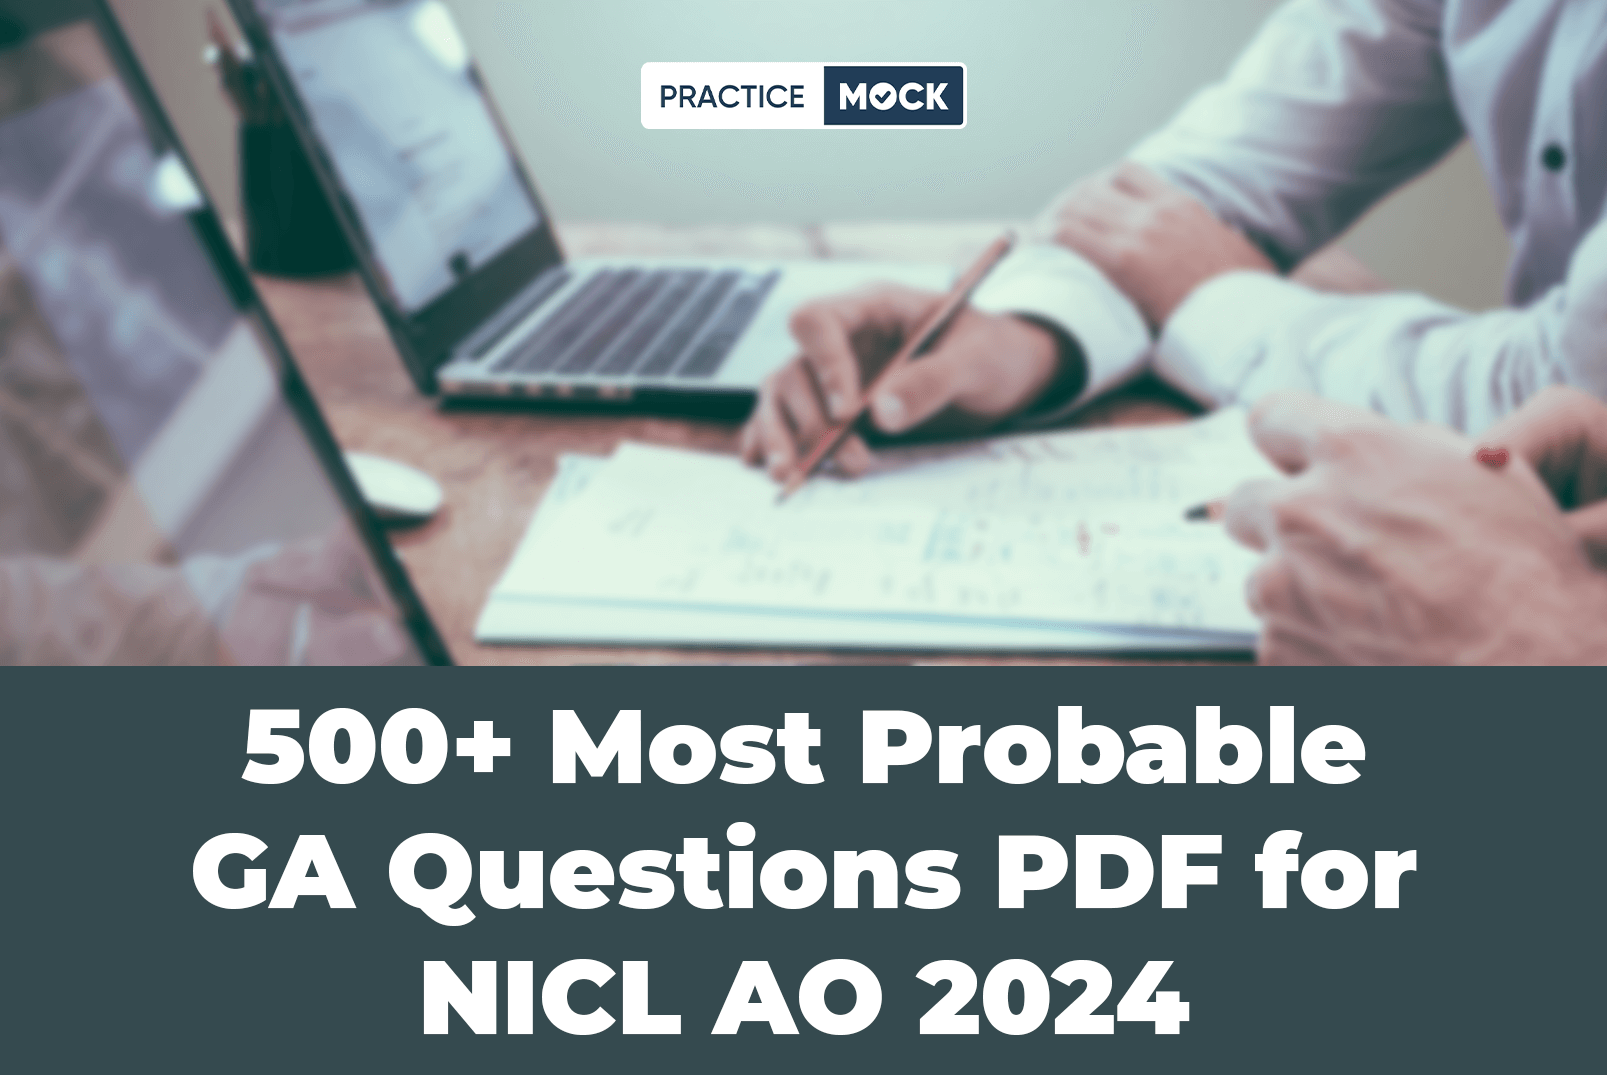 500+ Most Probable GA Questions PDF for NICL AO 2024